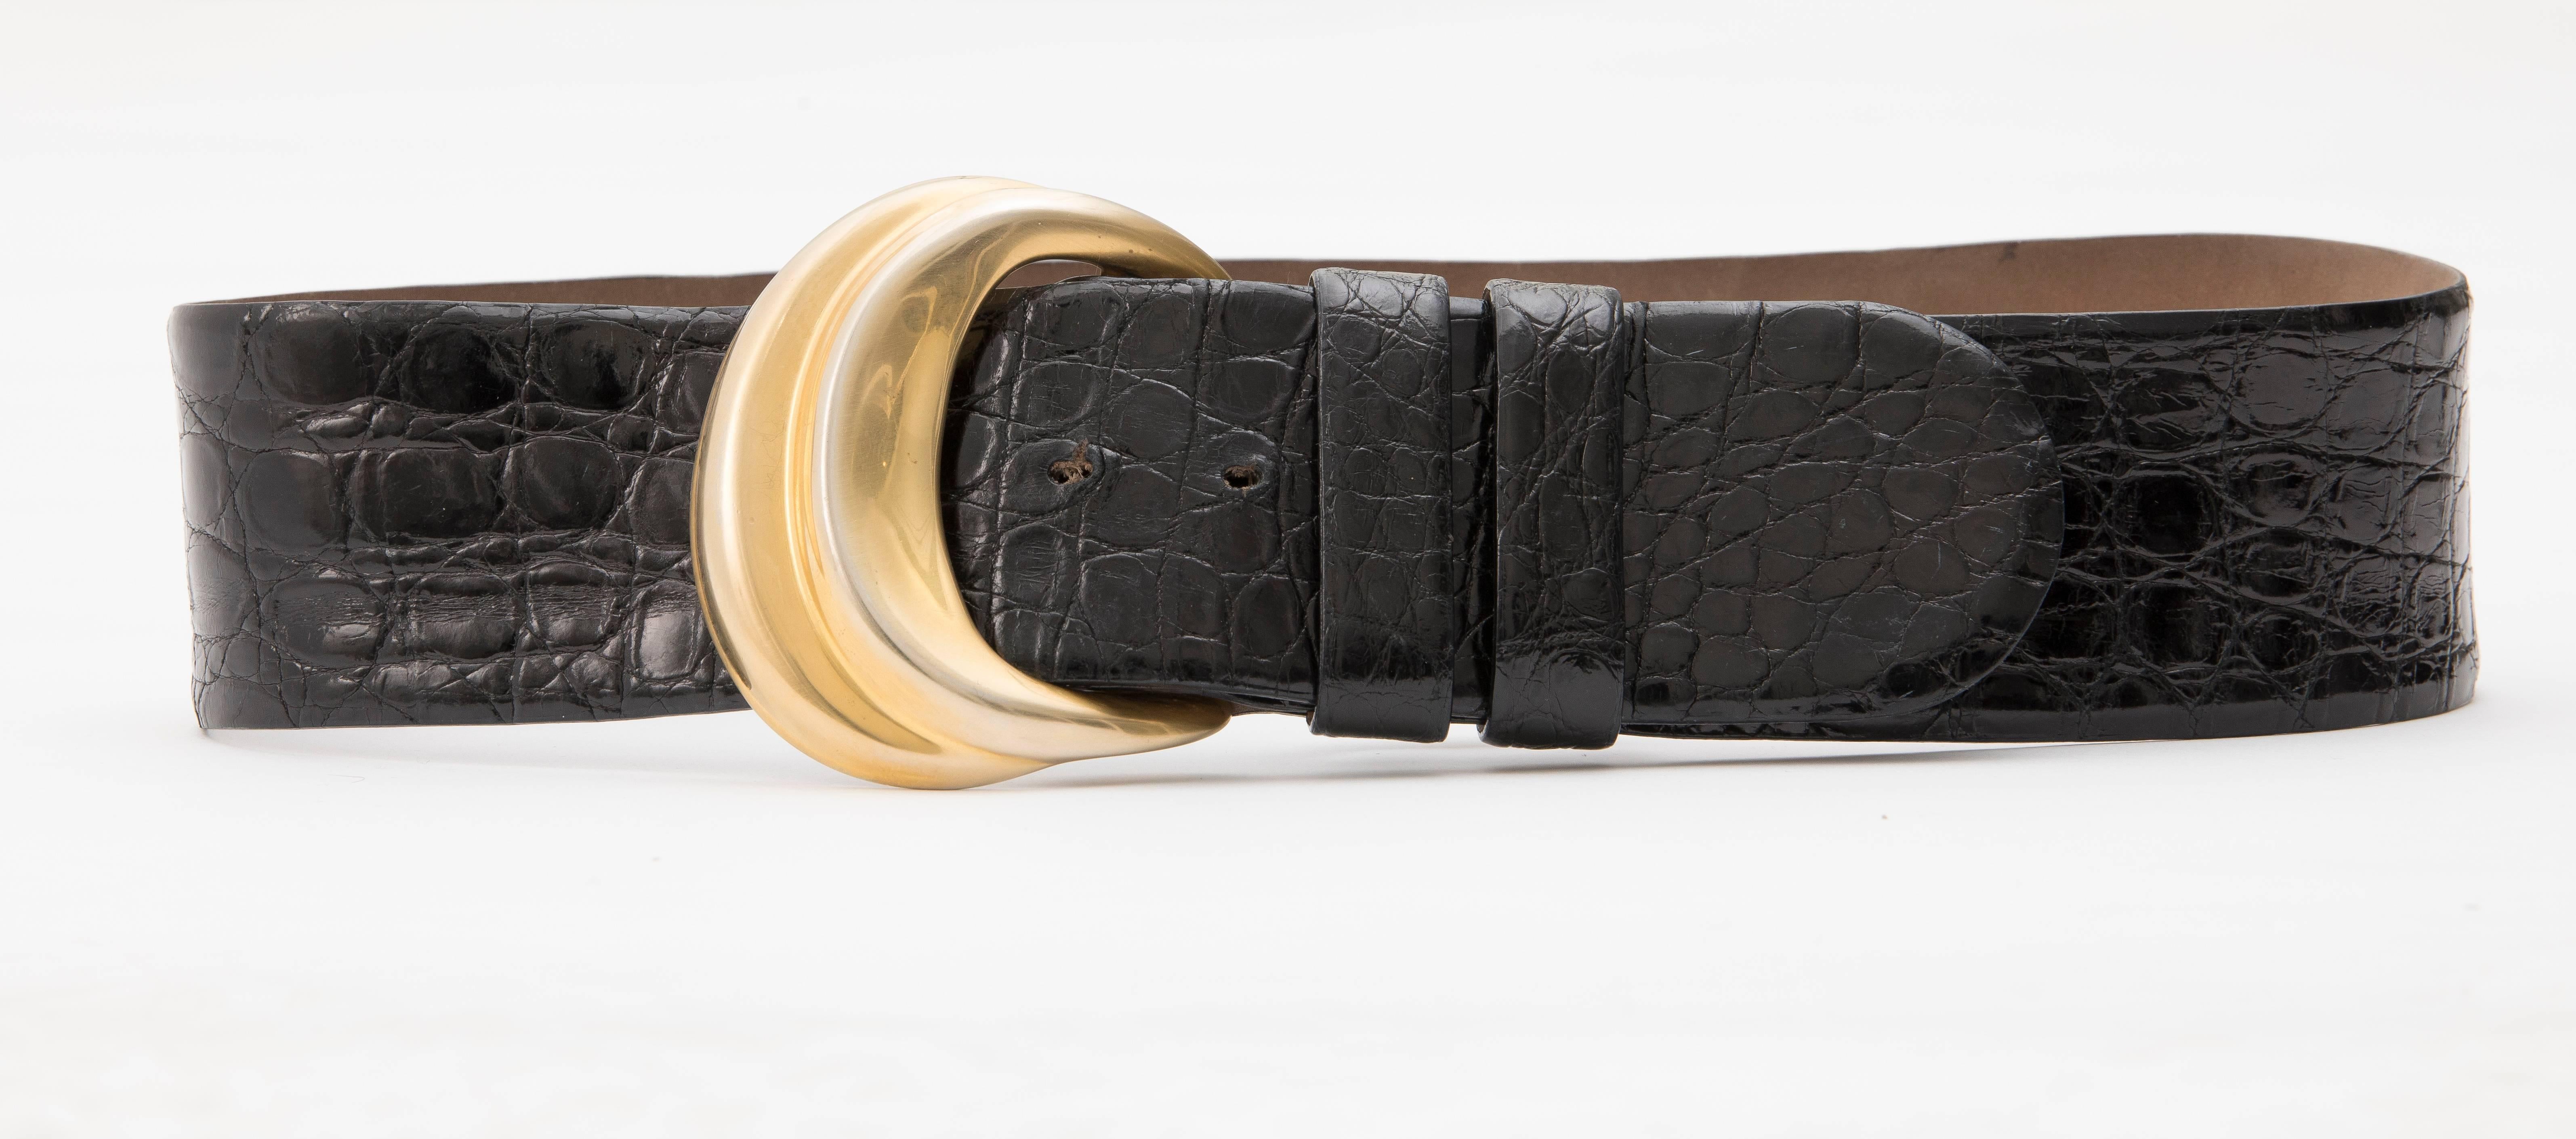 Donna Karan, Circa 1980's black Caiman Crocodile waist belt with tonal stitching and Robert Lee Morris gold-tone buckle with peg-in-hole closure.

Size: Large

Length Min: 32, Length Max: 35, Width: 2.5
